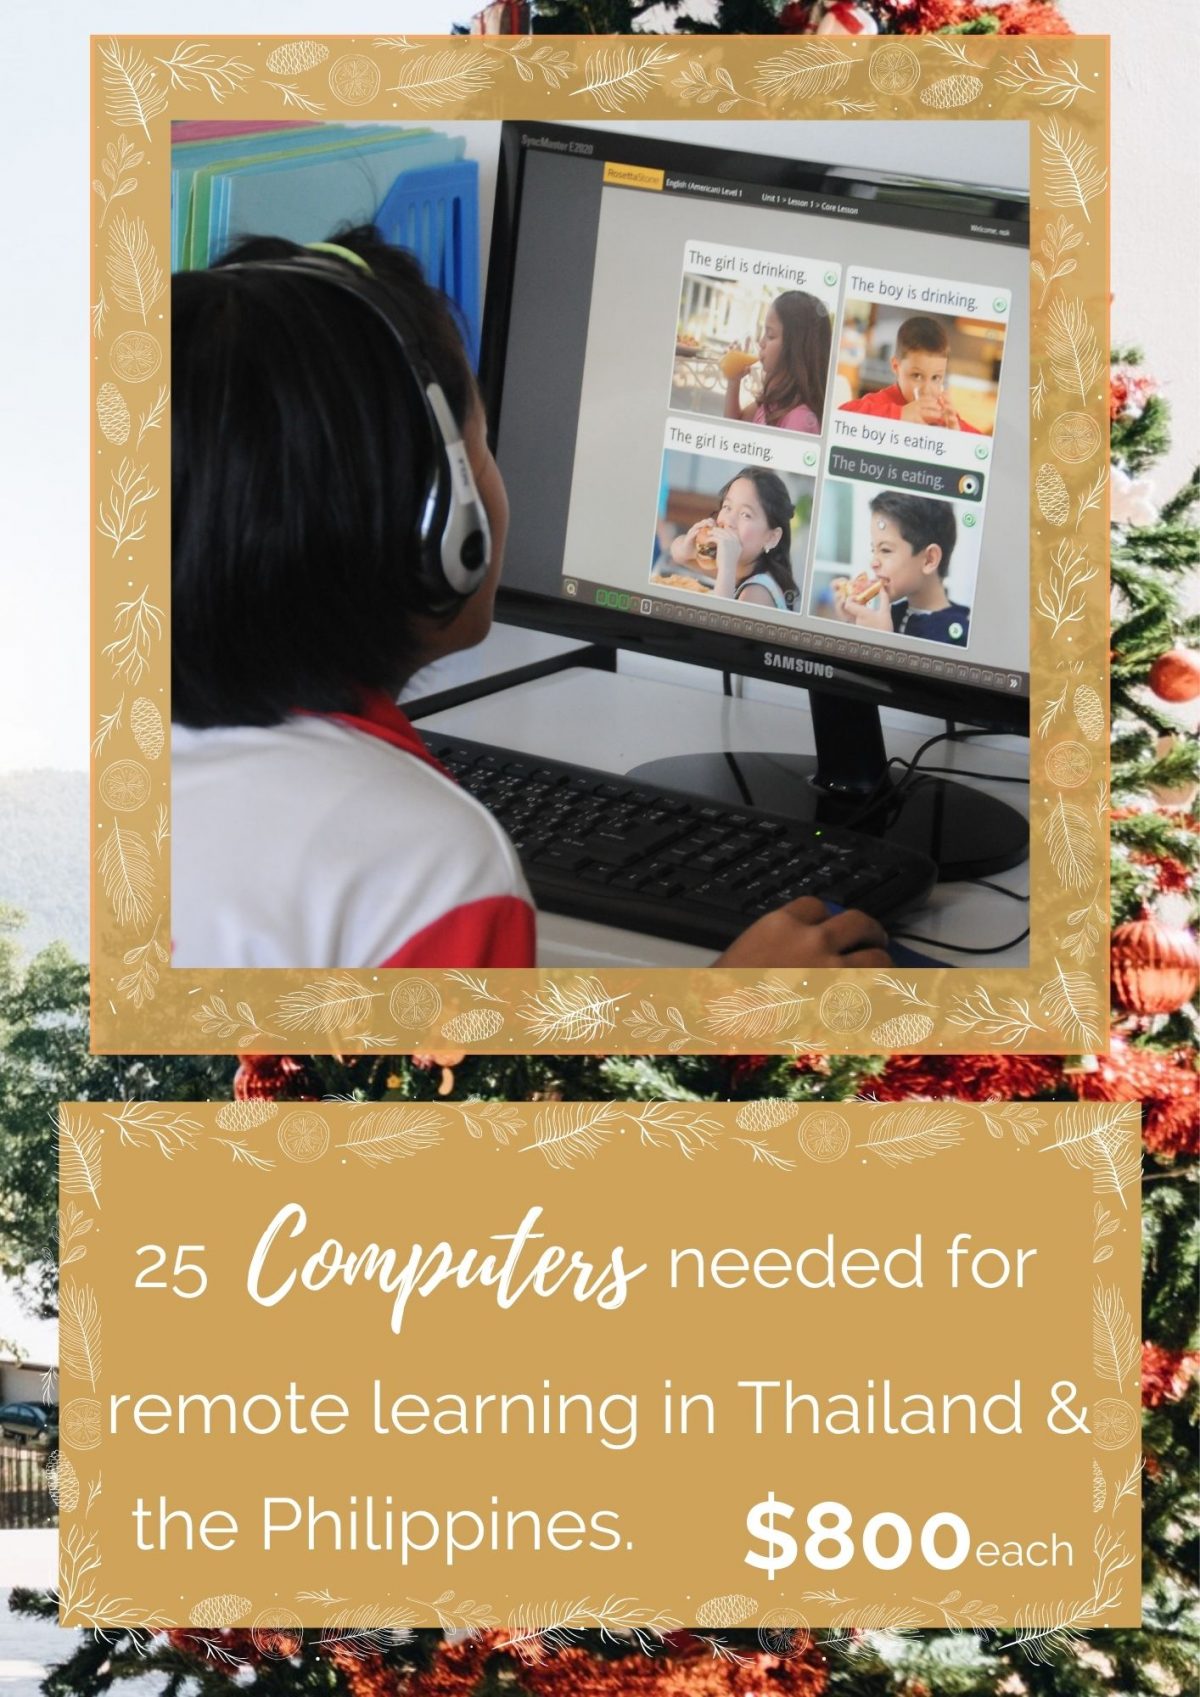 25 Computers needed for remote learning in Thailand and the Philippines. $800 each